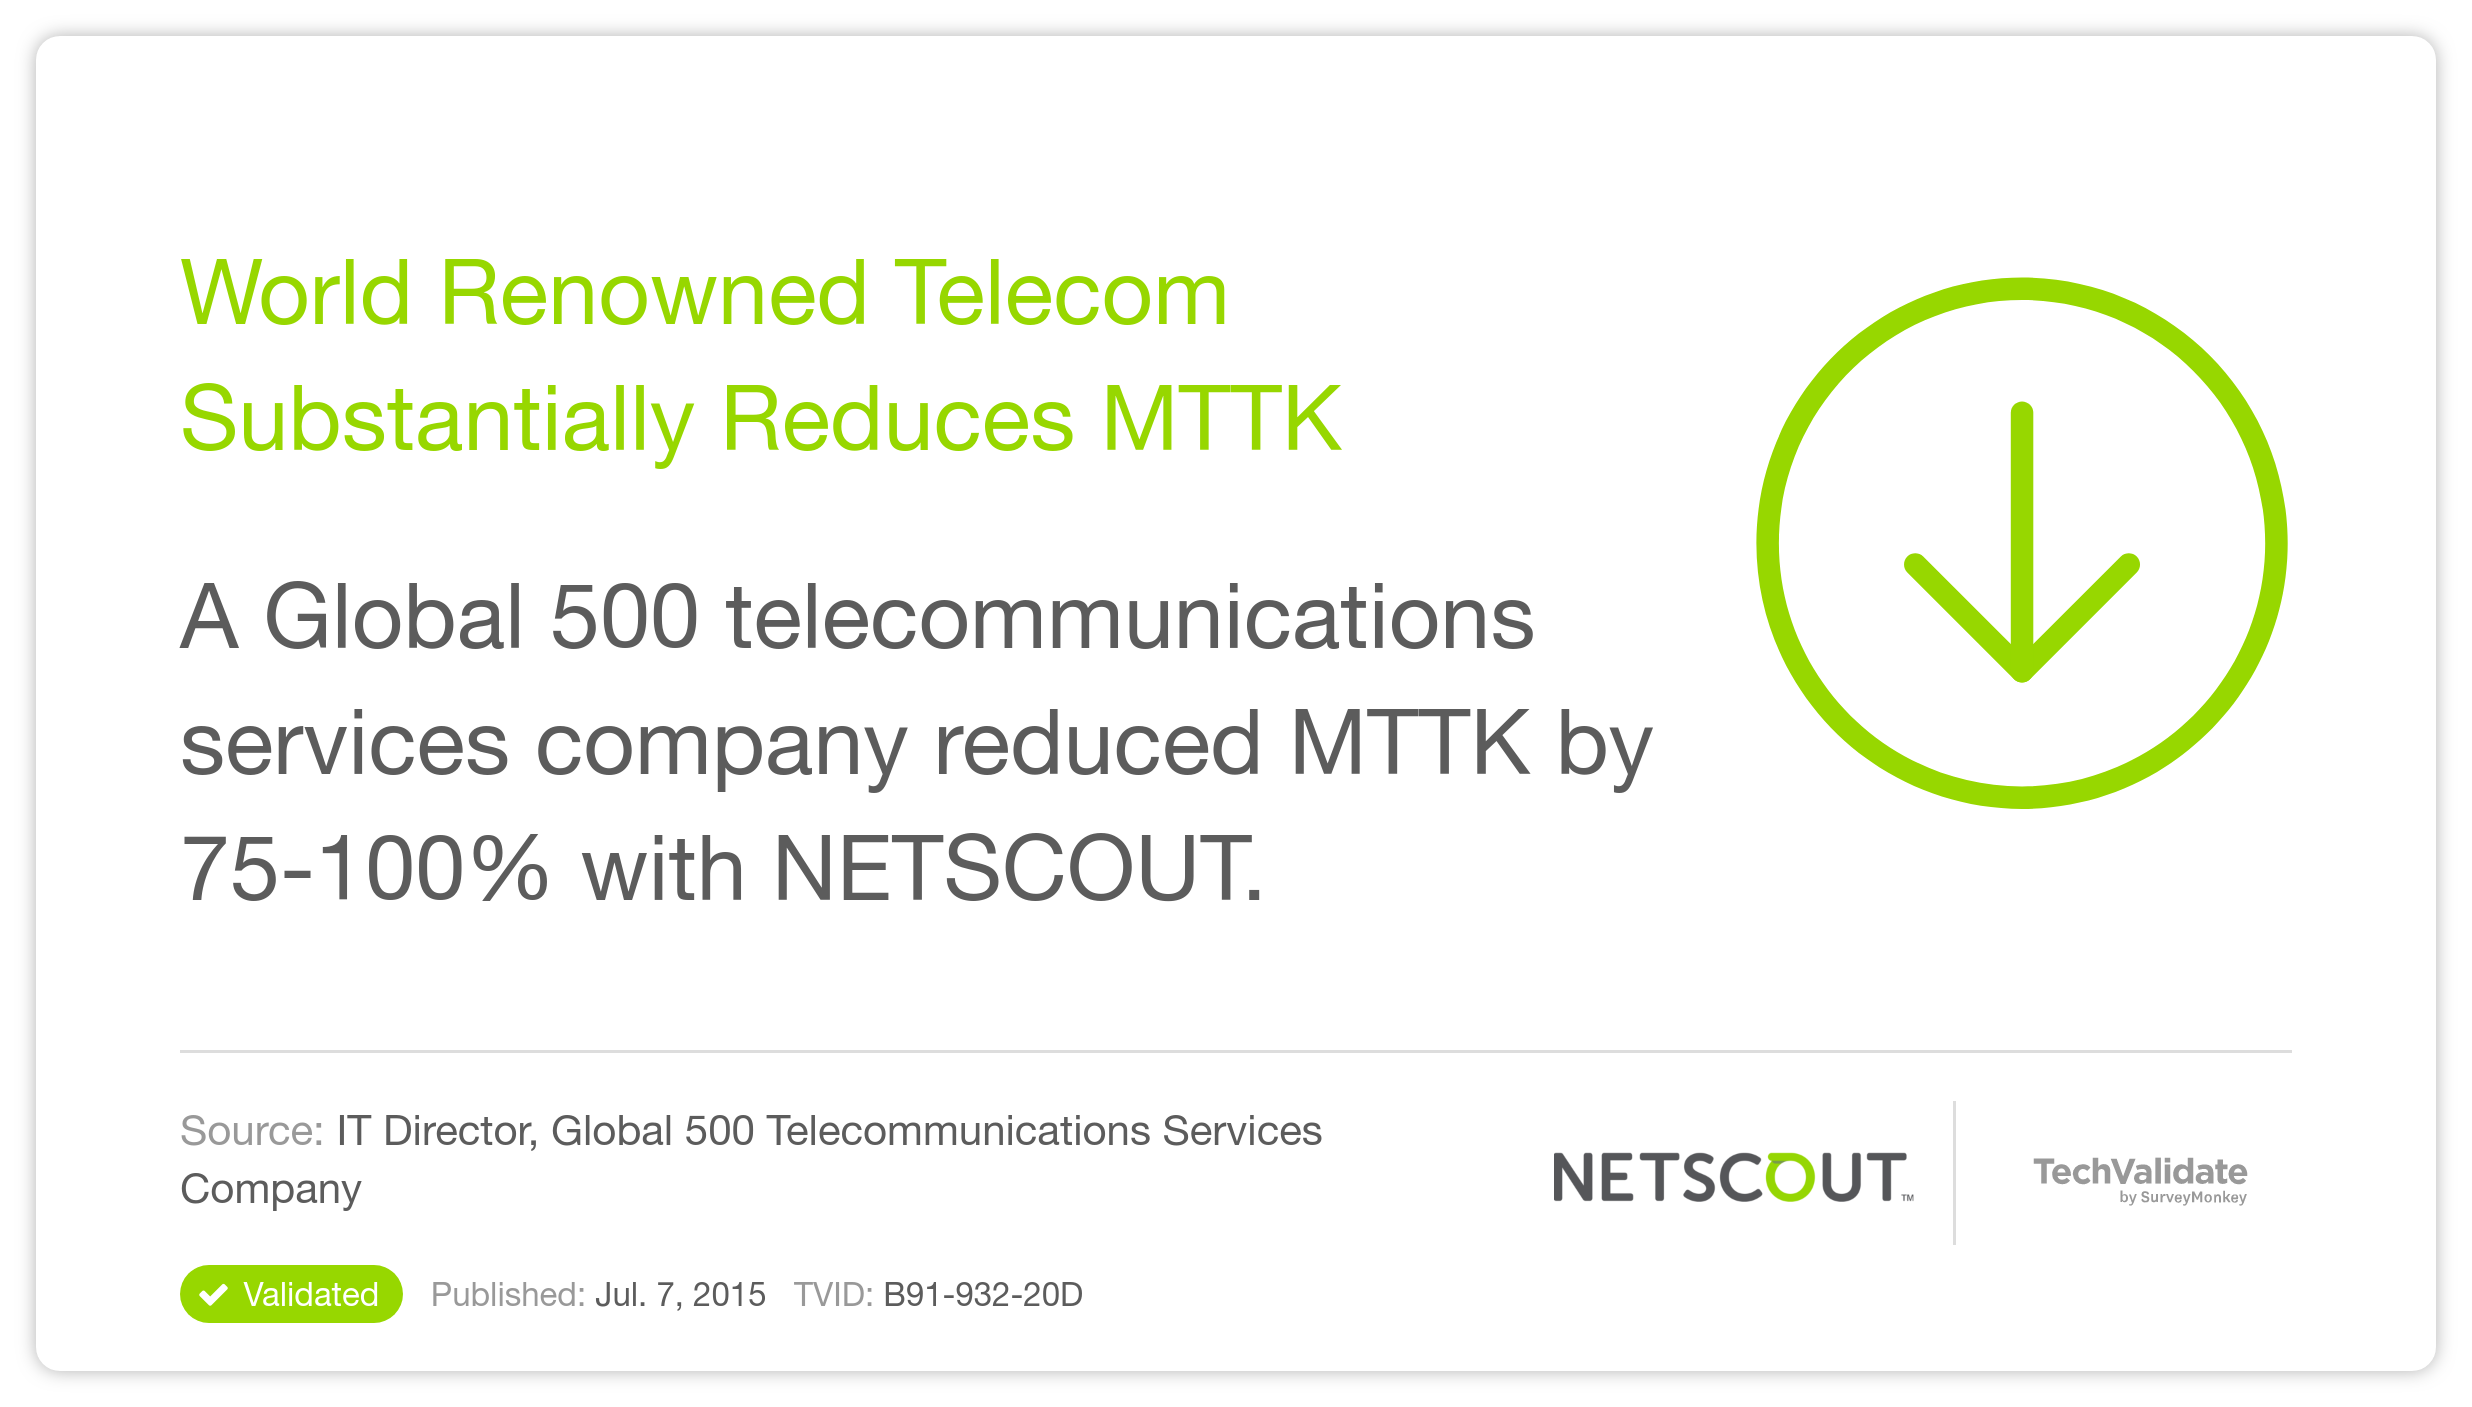 World Renowned Telecom Substantially Reduces MTTK